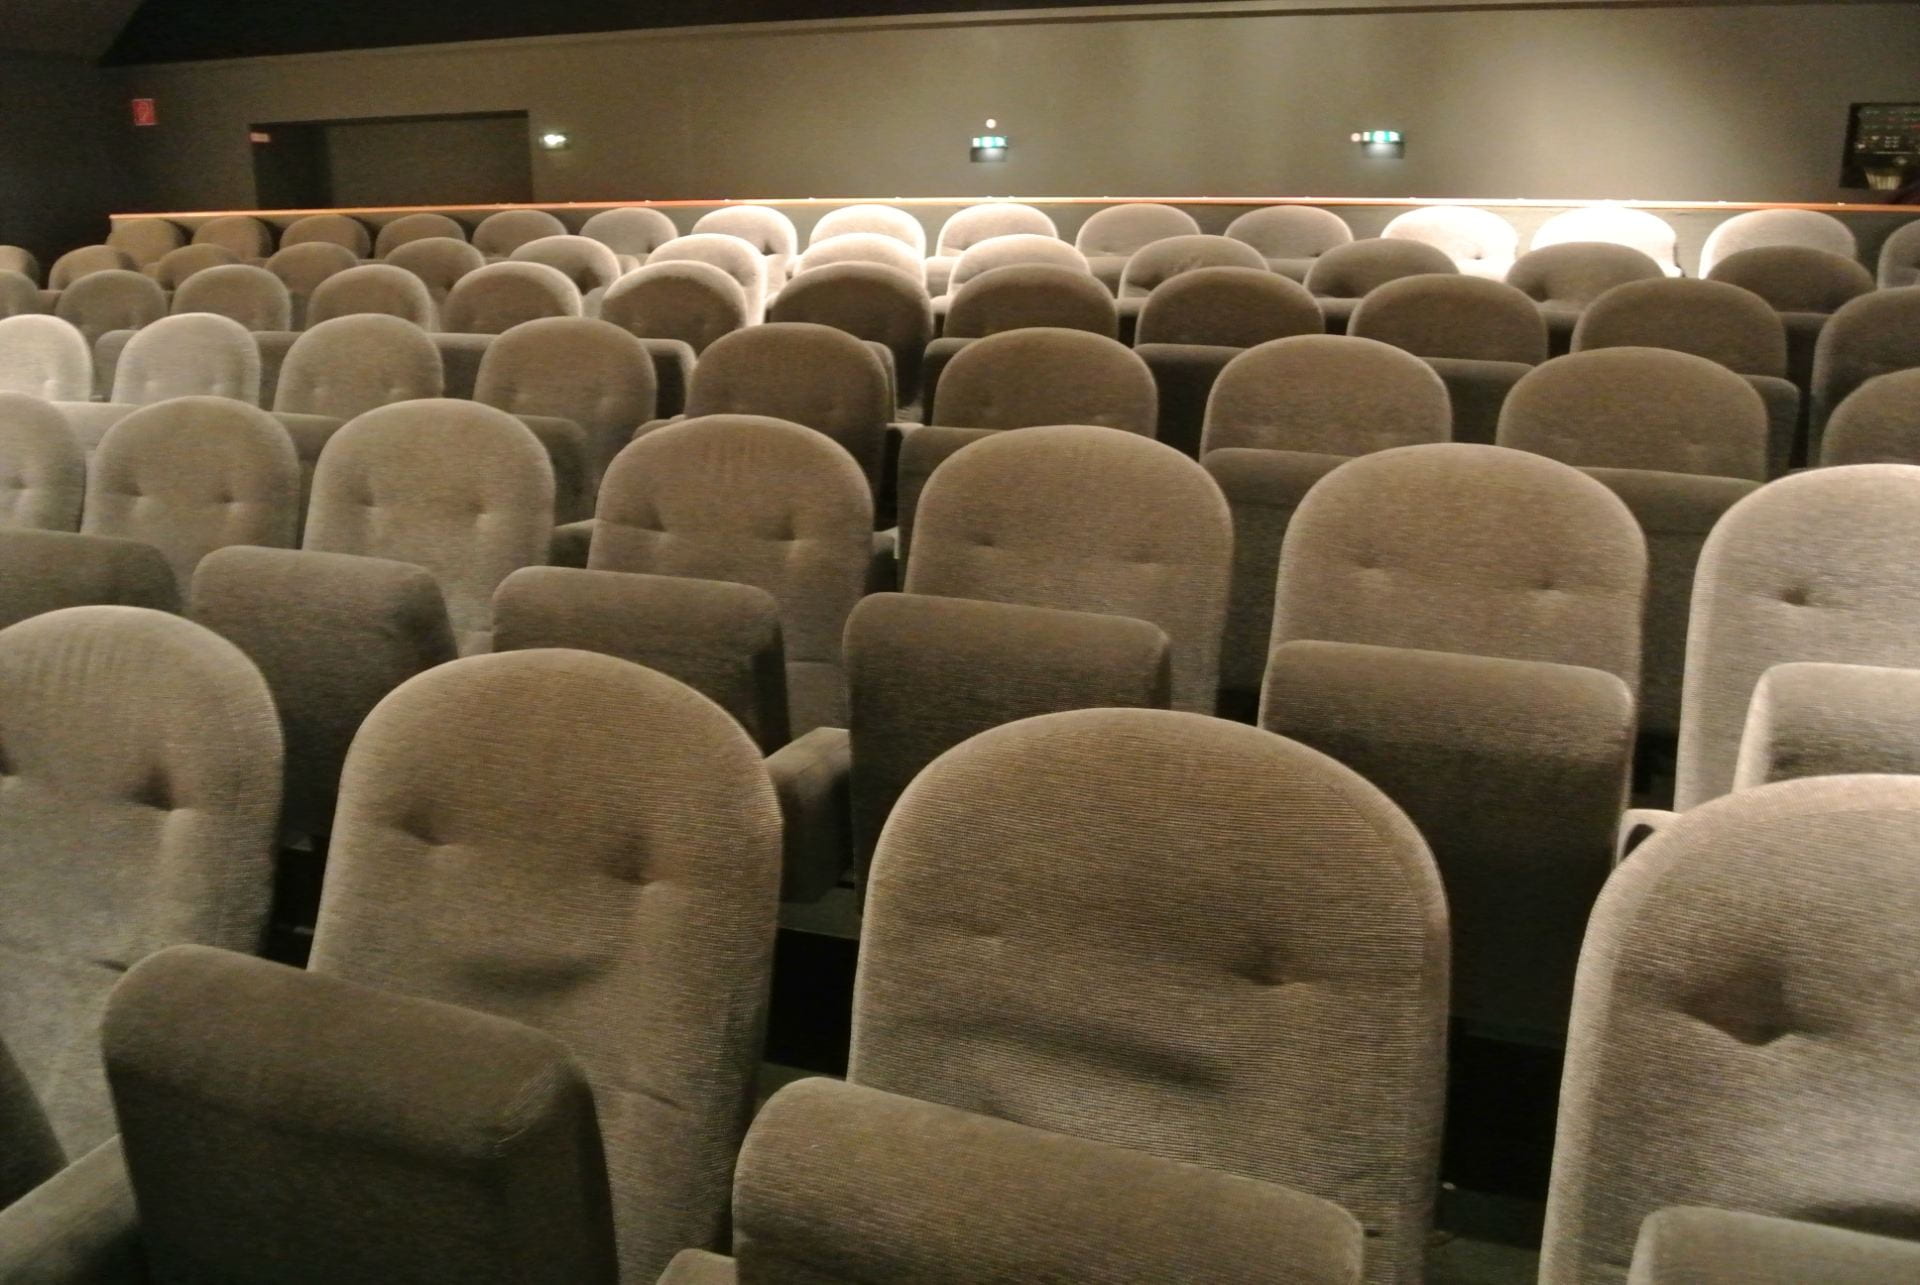 Rows of seats in a movie theater.